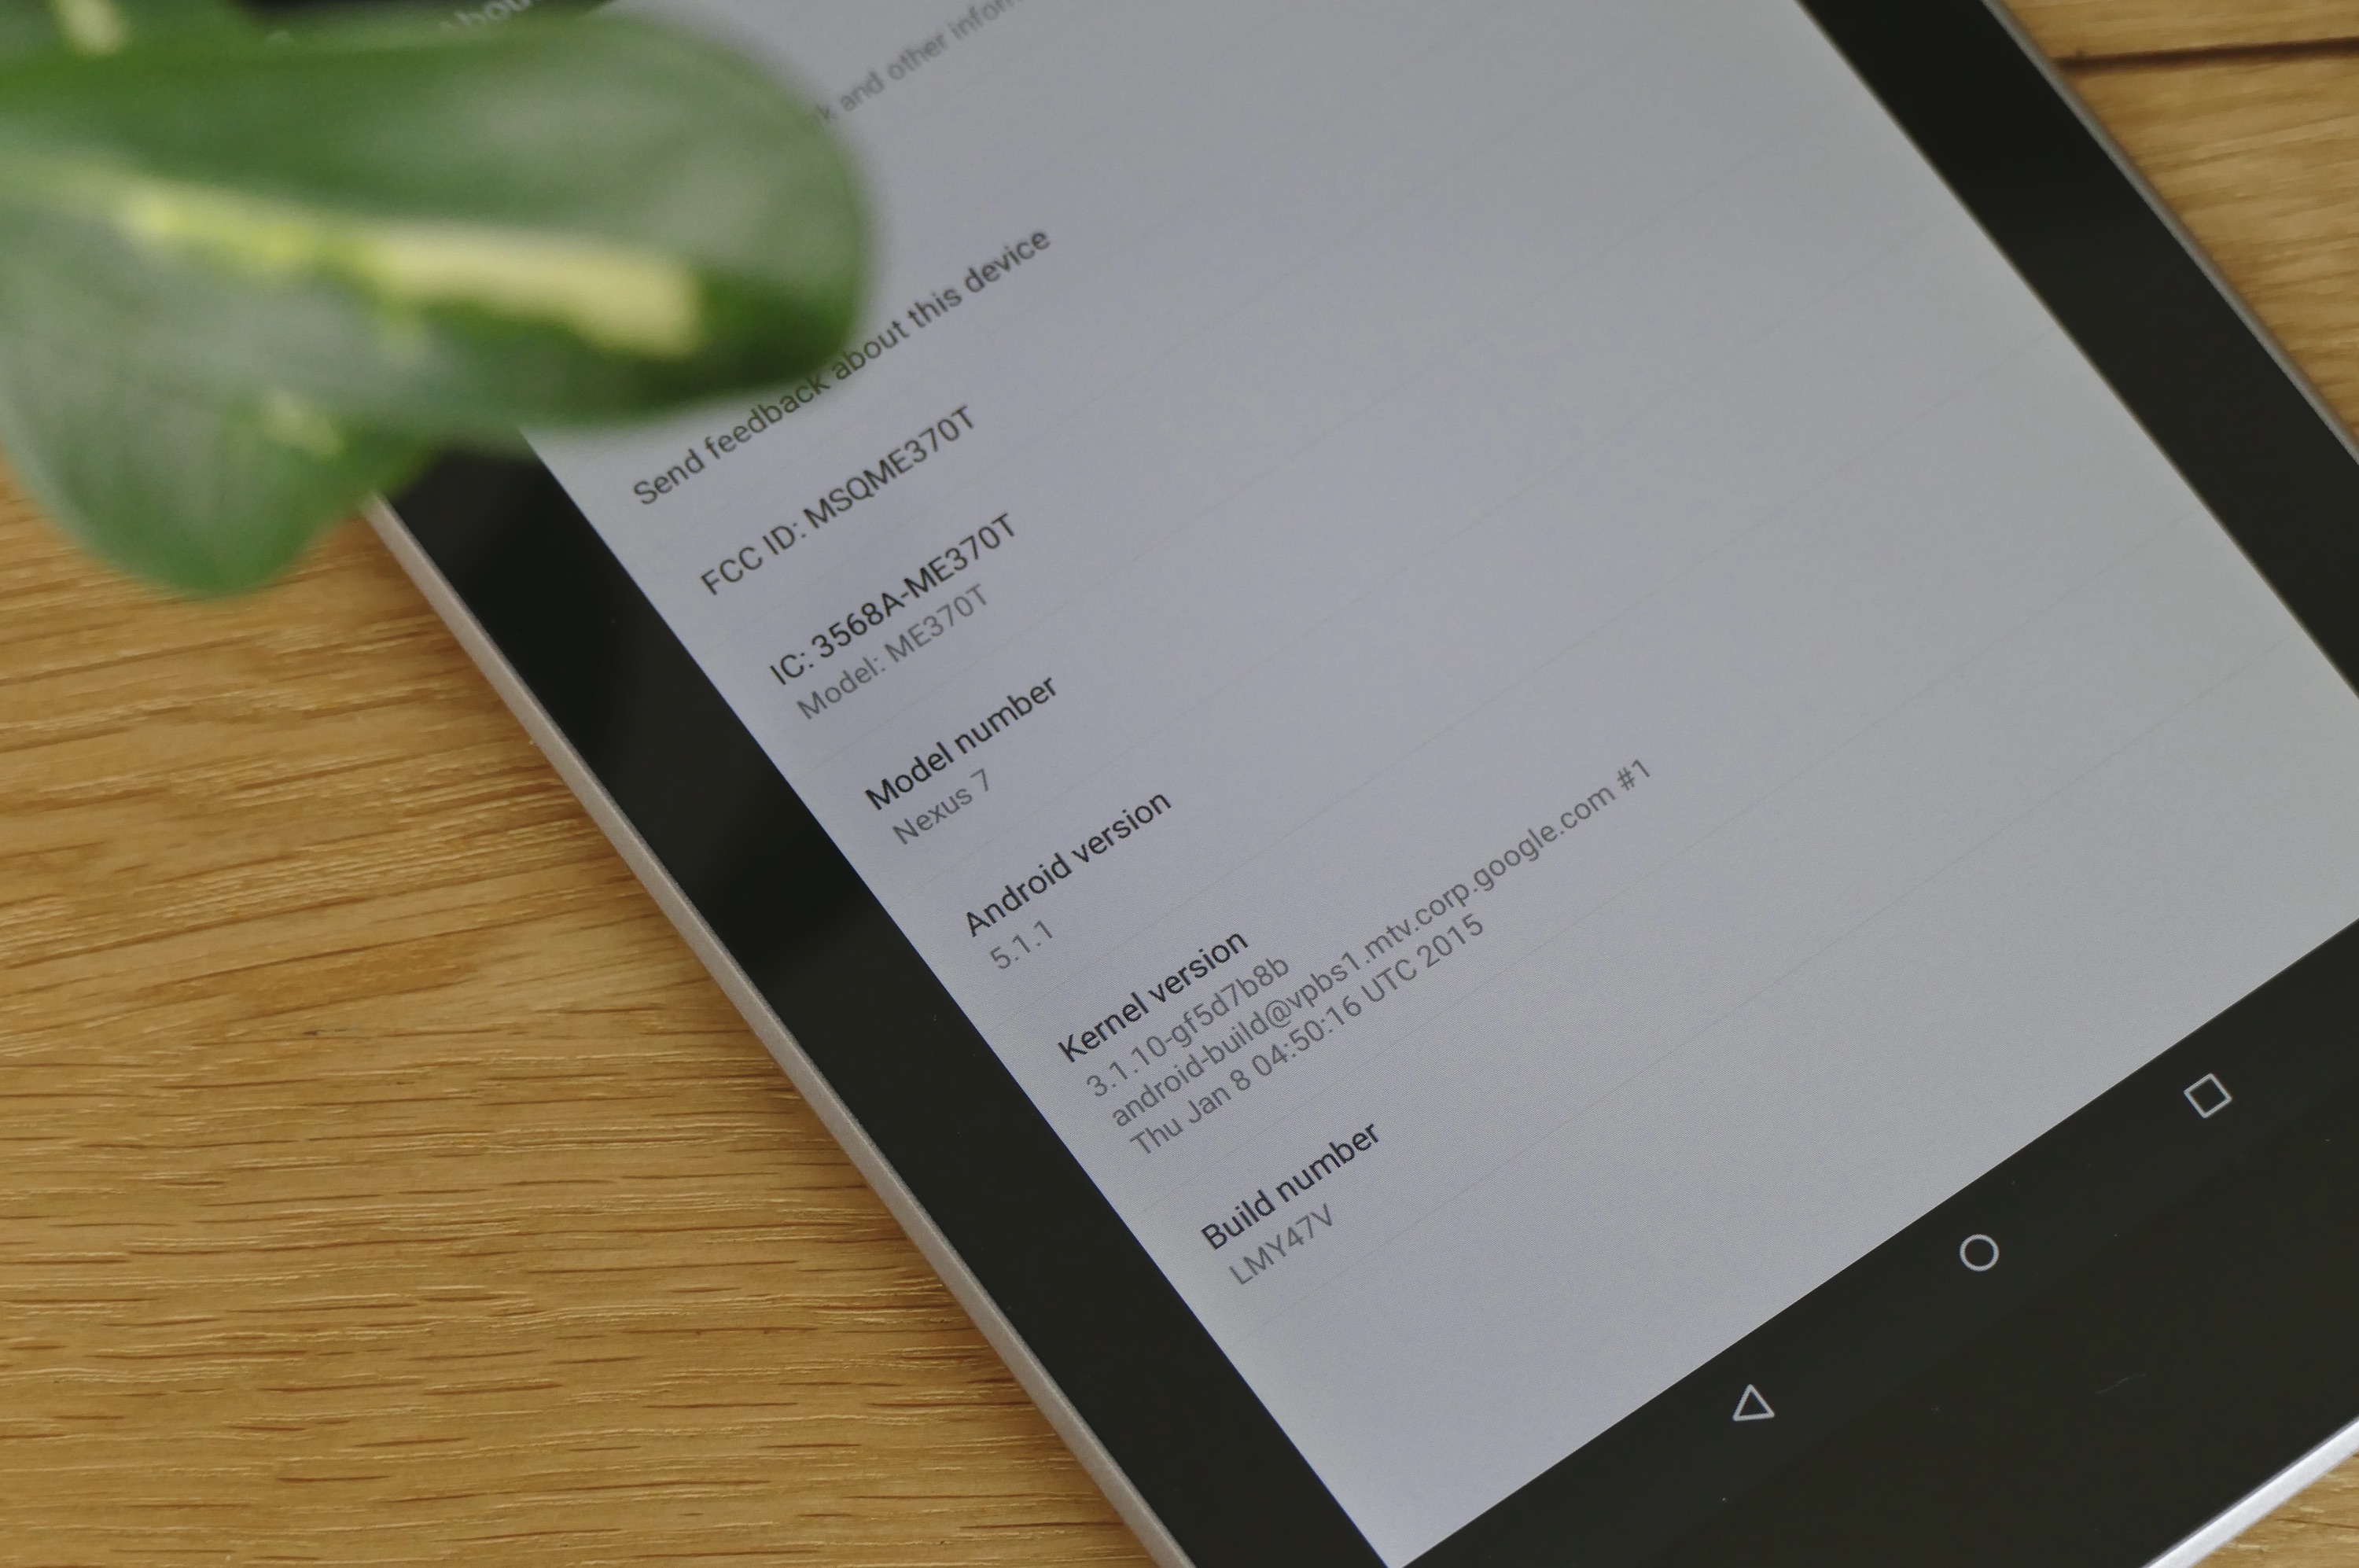 The Nexus 7 was the perfect right-place, right-time product